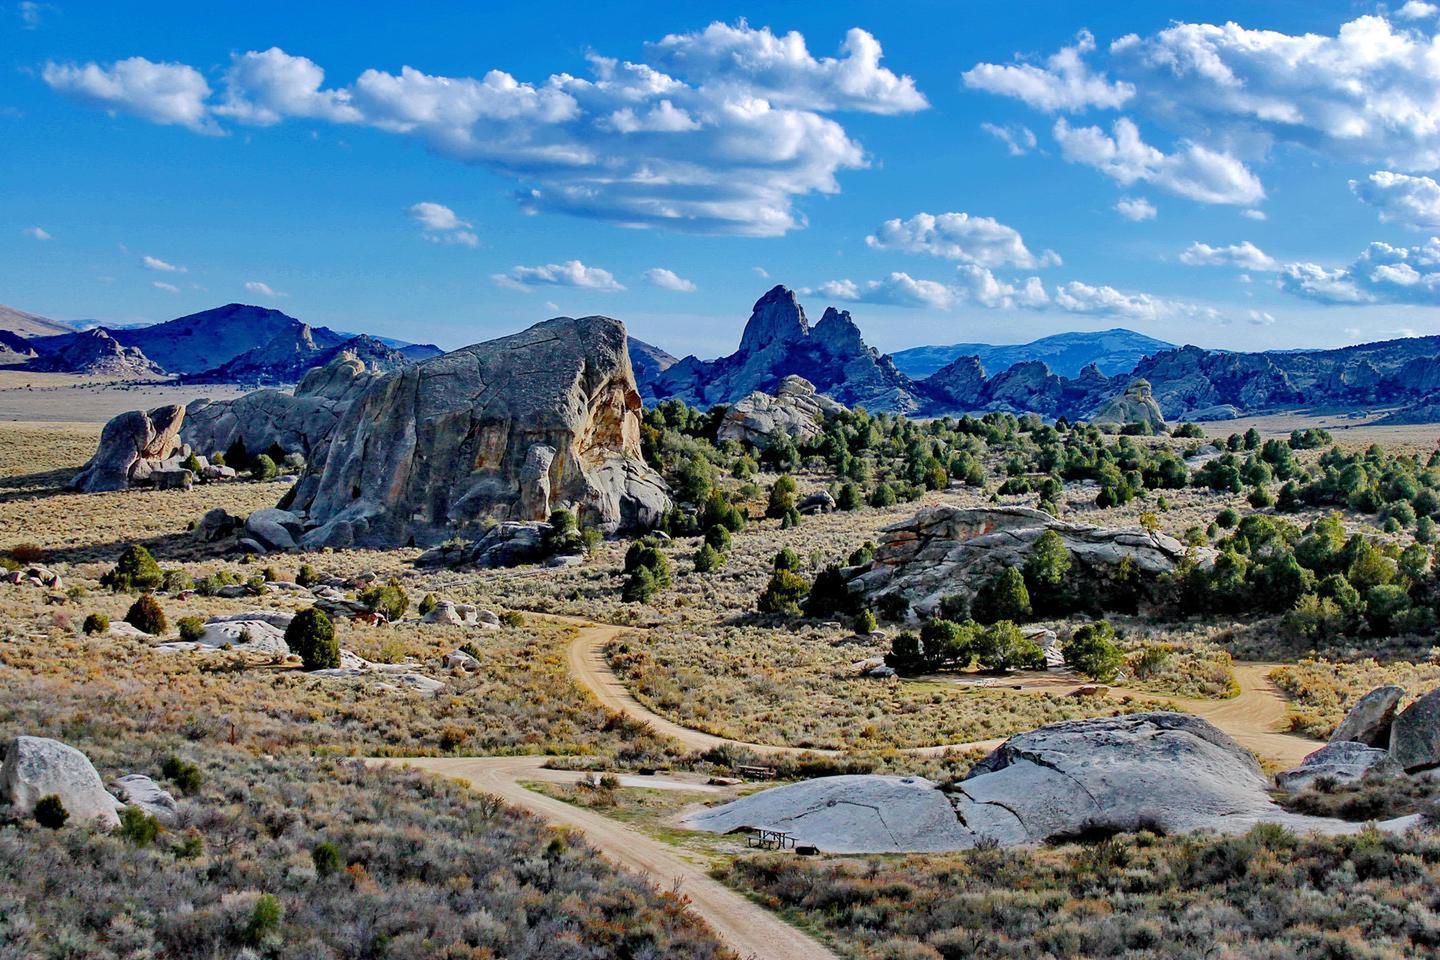 City of Rocks National ReserveCampsites are nestled here in the Elephant Rock Basin